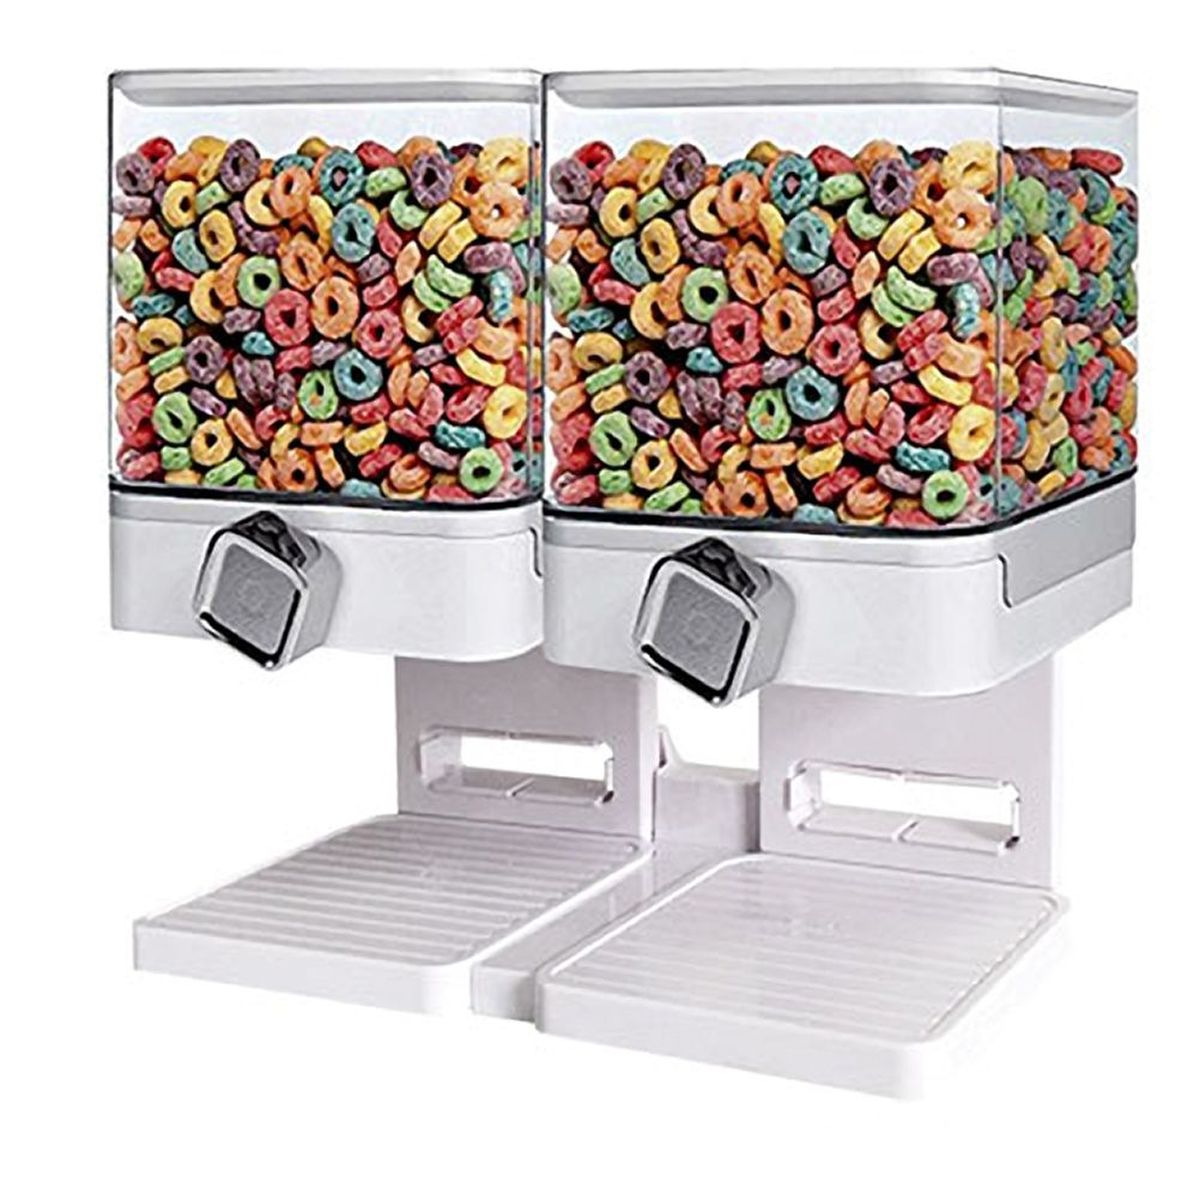 Double dispenser for cereals